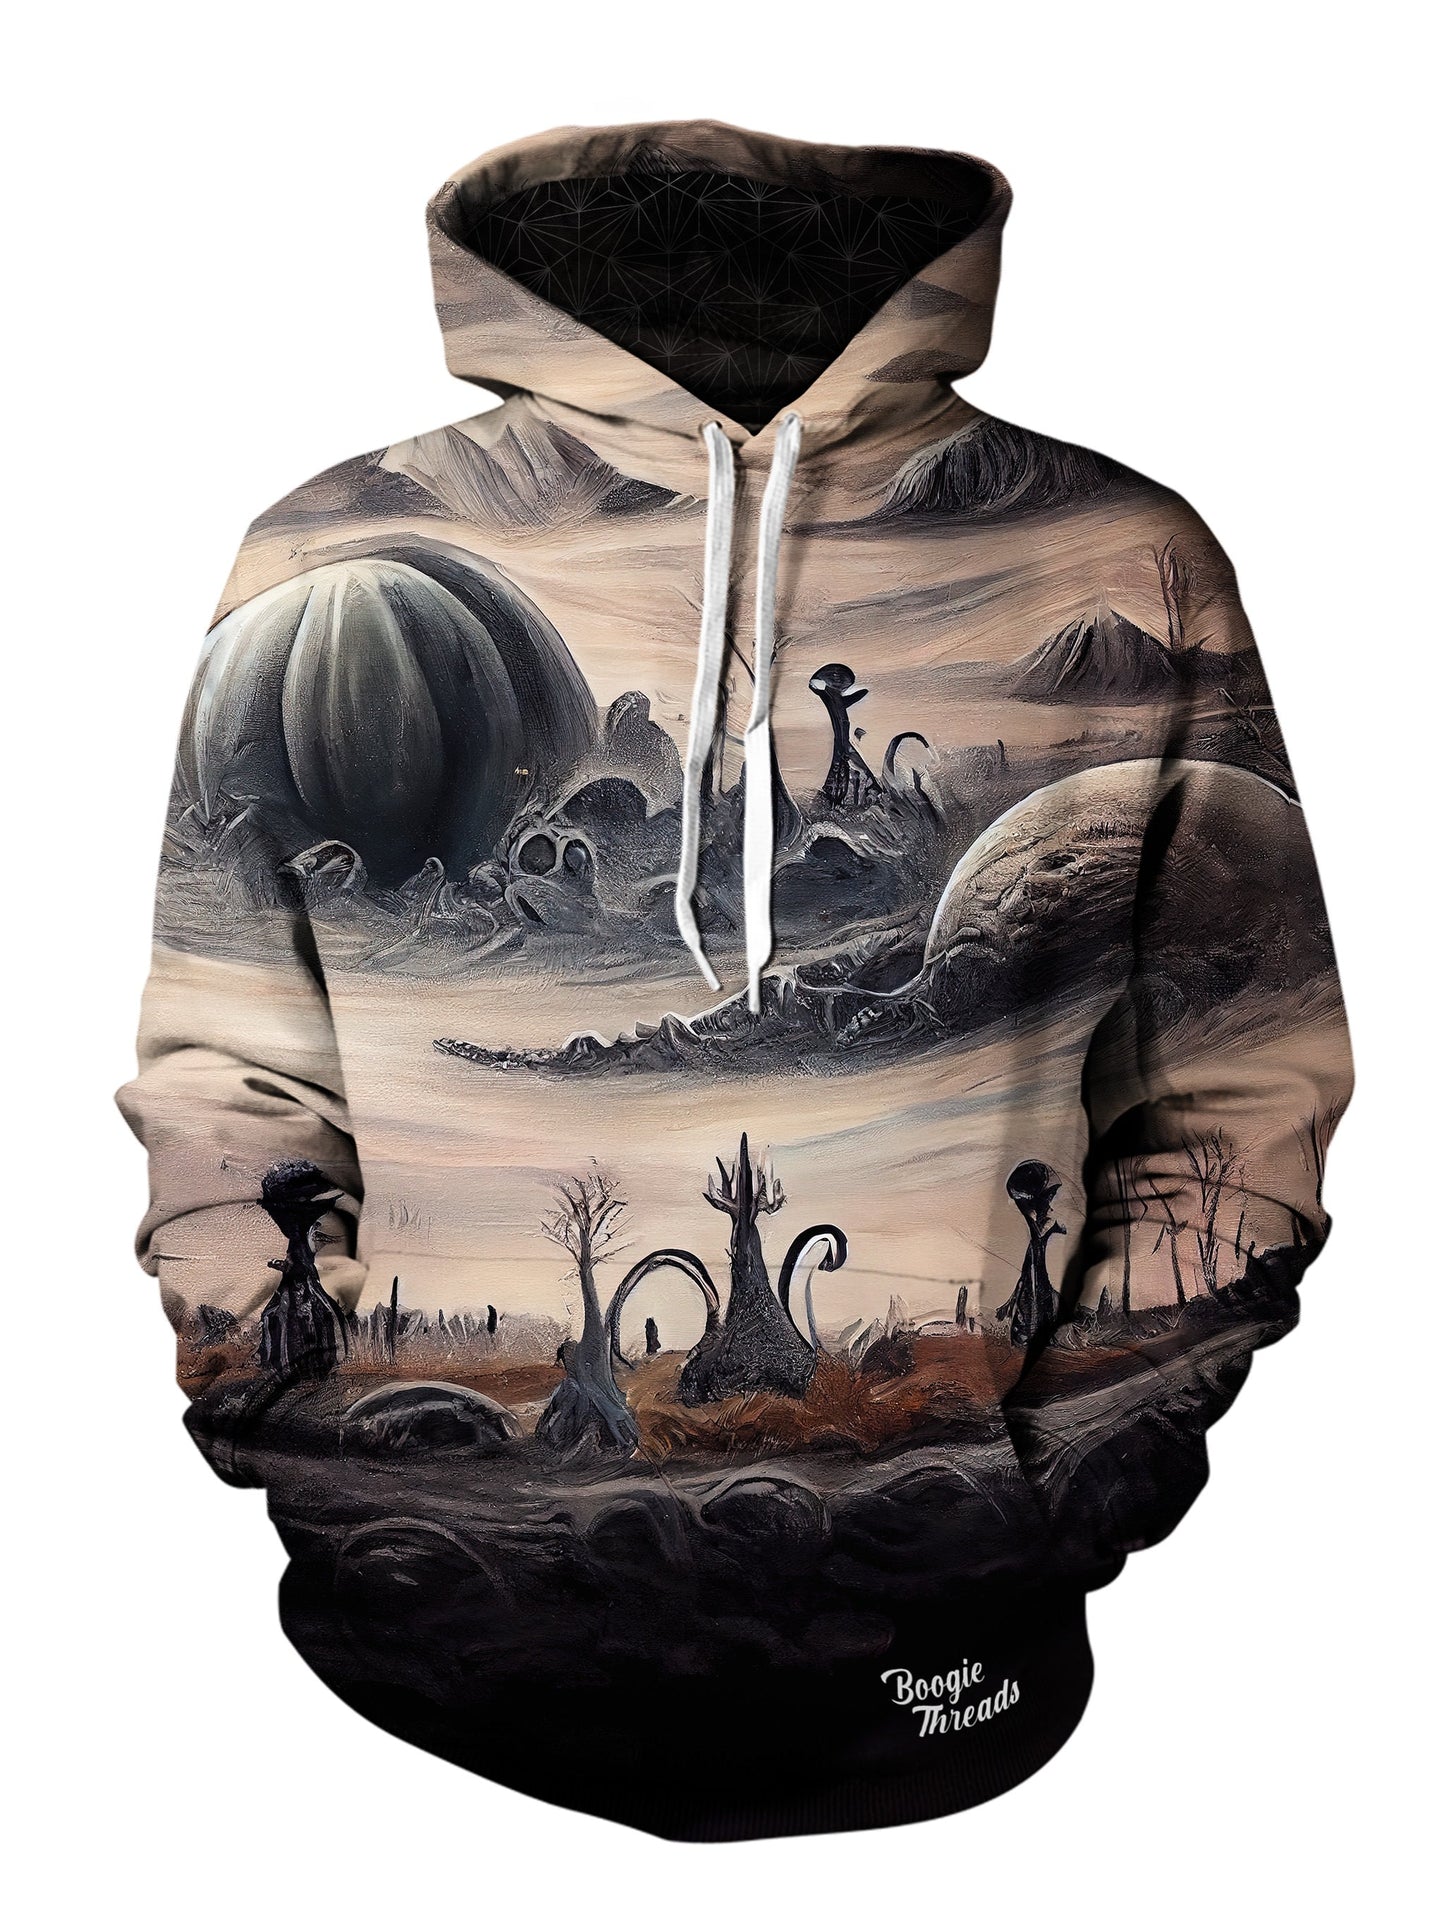 Euphoric Dreams Unisex Pullover Hoodie - EDM Festival Clothing - Boogie Threads